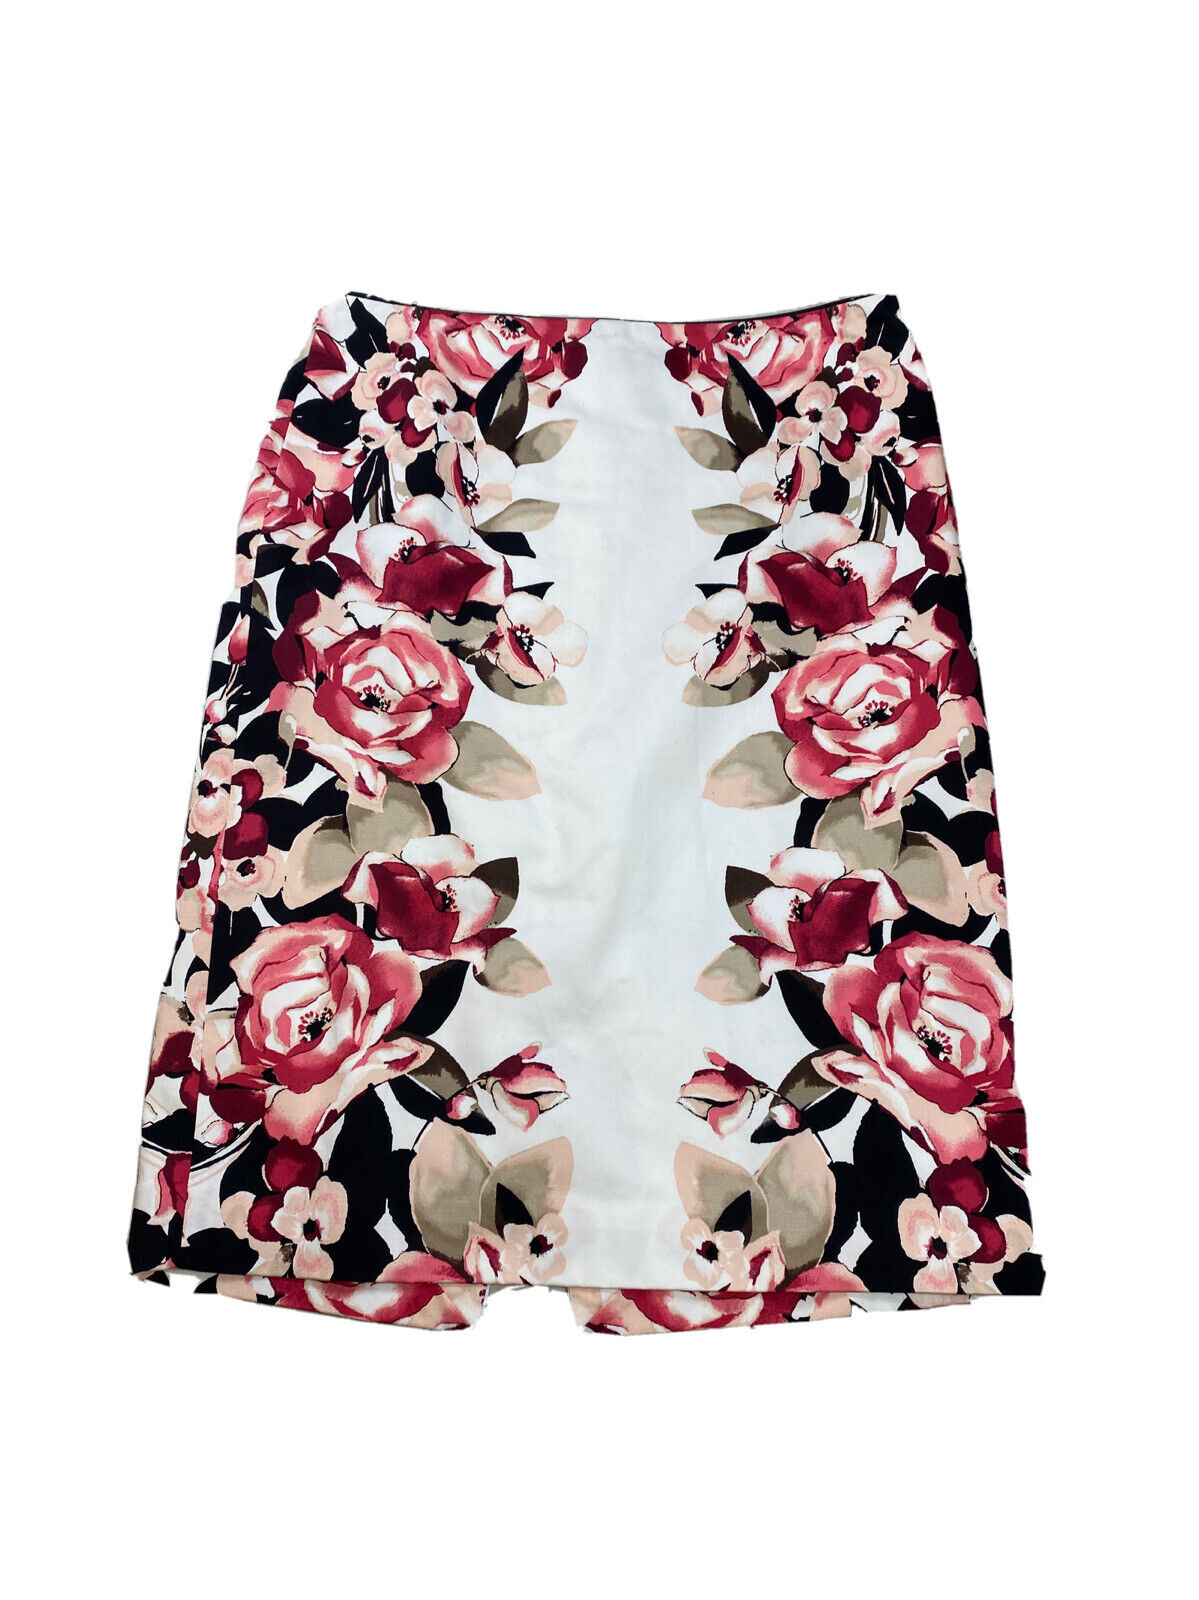 White House Black Market Womens White & Red Floral Lined Pencil Skirt - 6